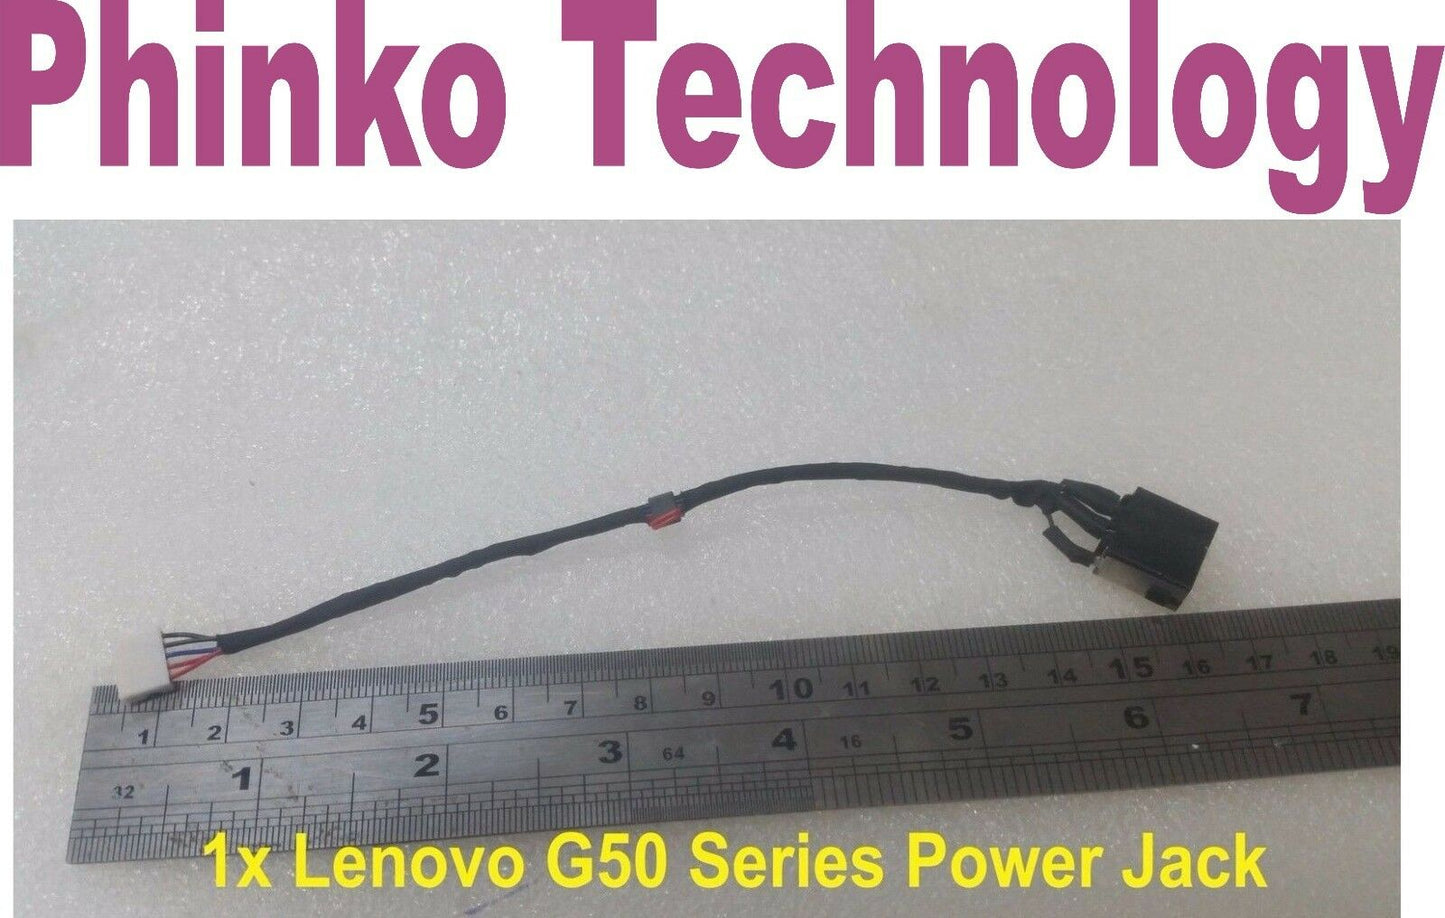 DC POWER JACK HARNESS PLUG IN CABLE FOR LENOVO IDEAPAD G50 SERIES